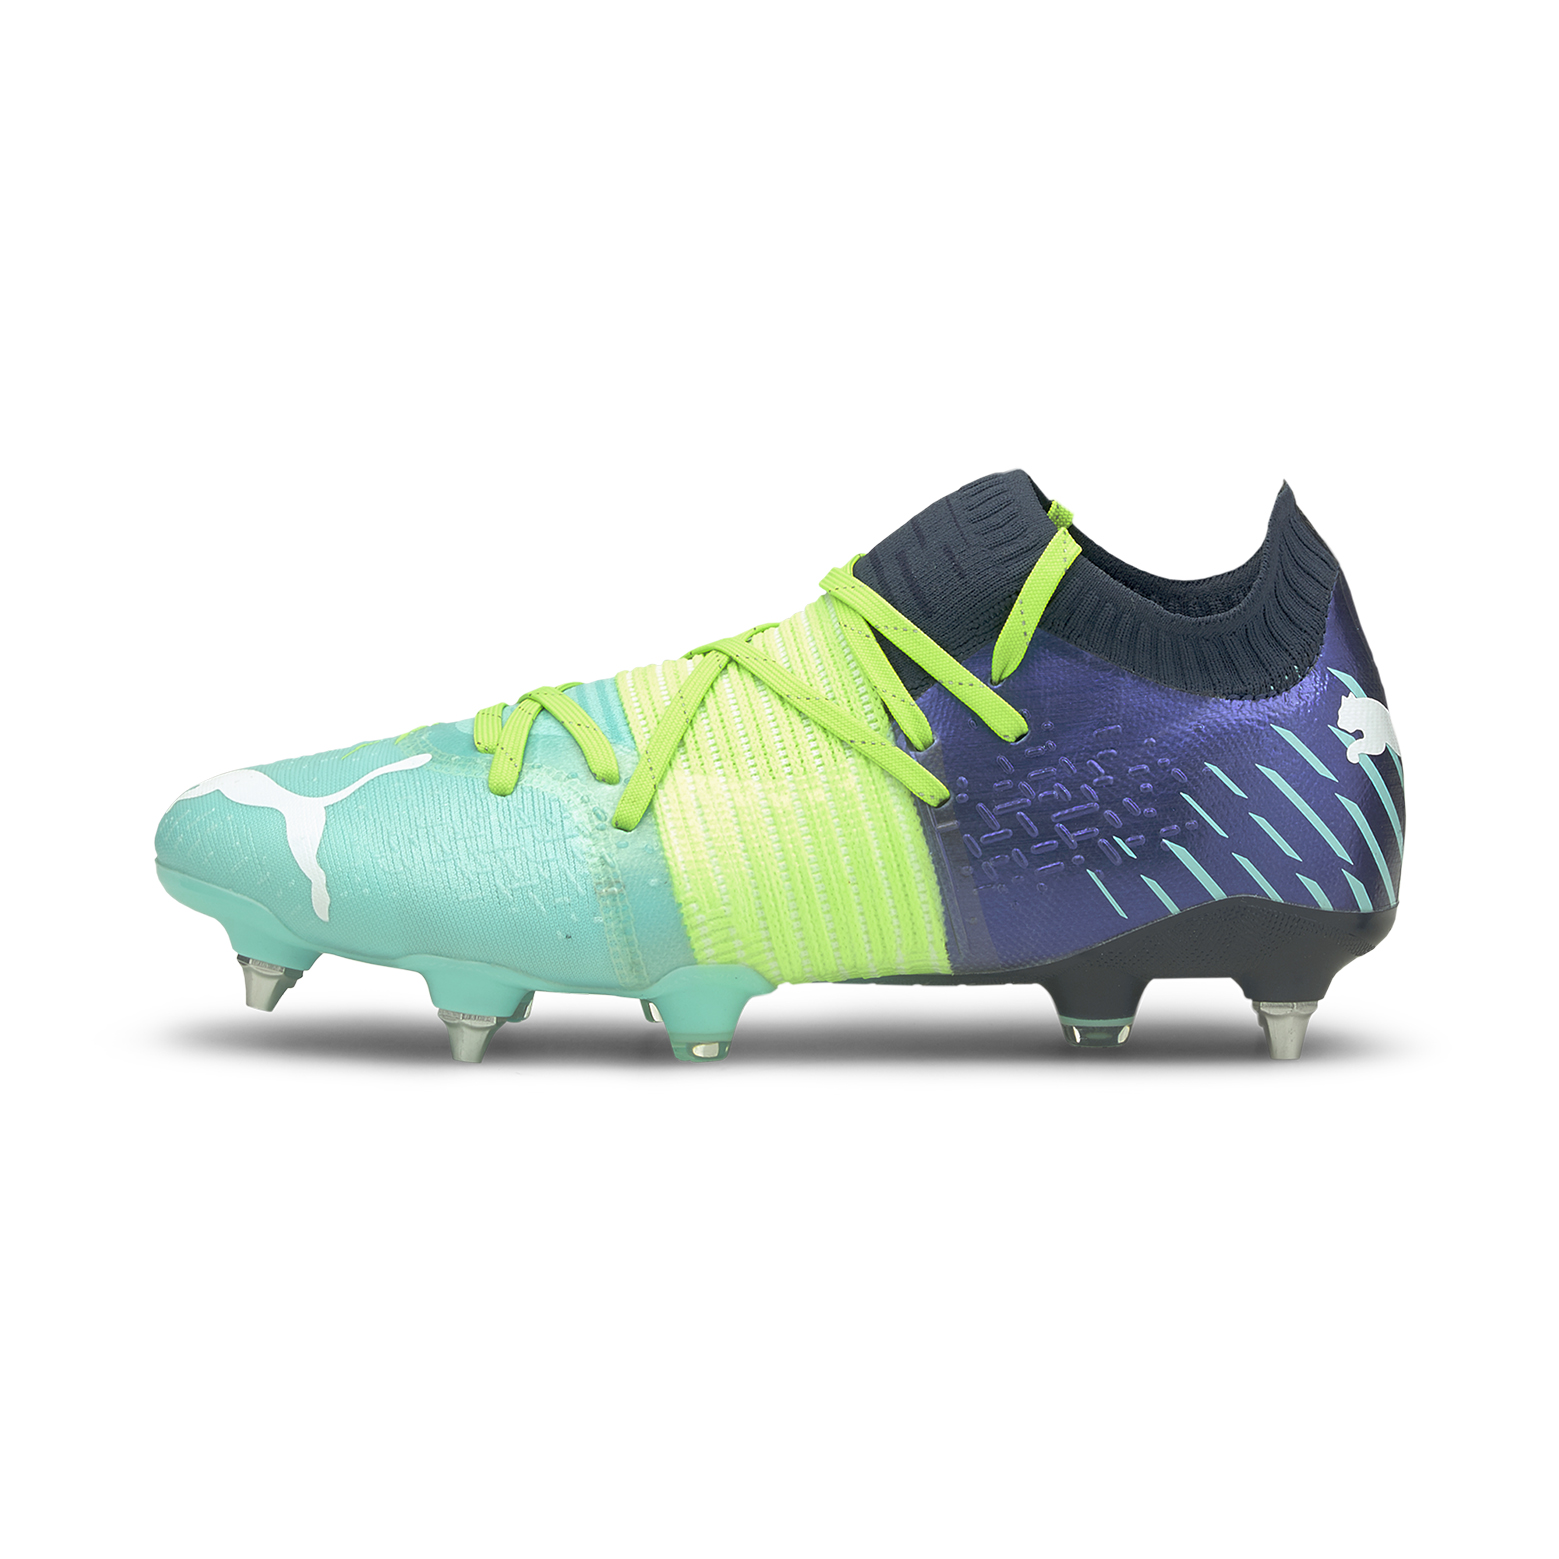 Puma Future Z 1.2 MxSG Boots | The Rugby Shop